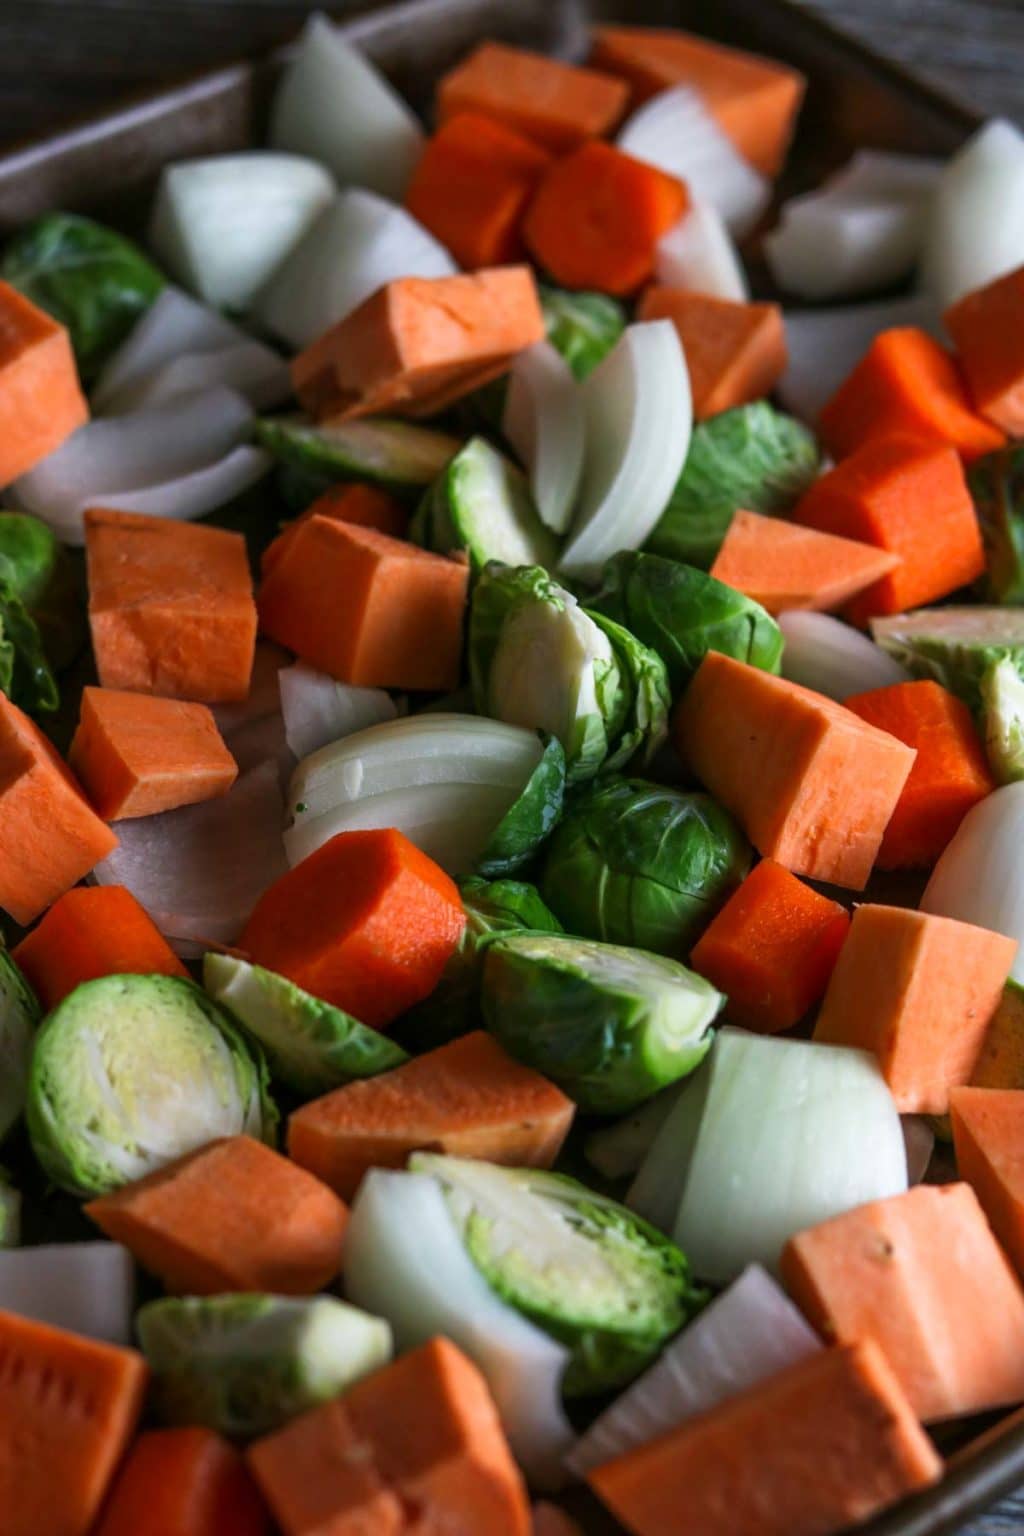 A sheet pan full of raw, cut veggies: brussel sprouts, onions, sweet potatoes, and carrots